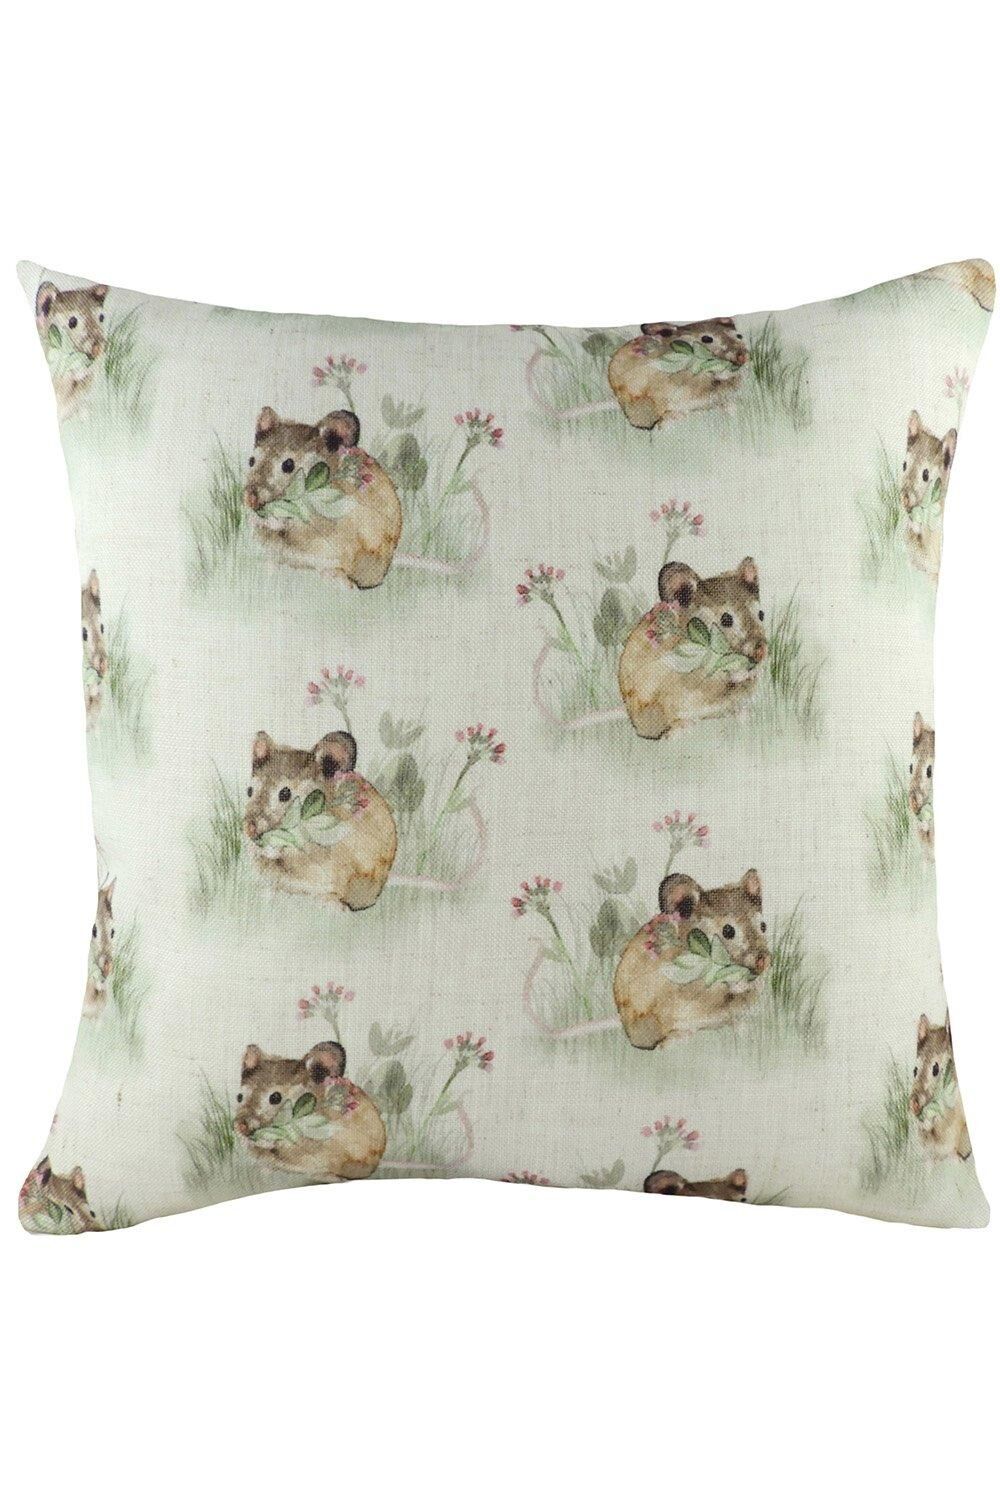 Evans Lichfield Hedgerow Mice Hand-Painted Watercolour Repeat Printed Cushion